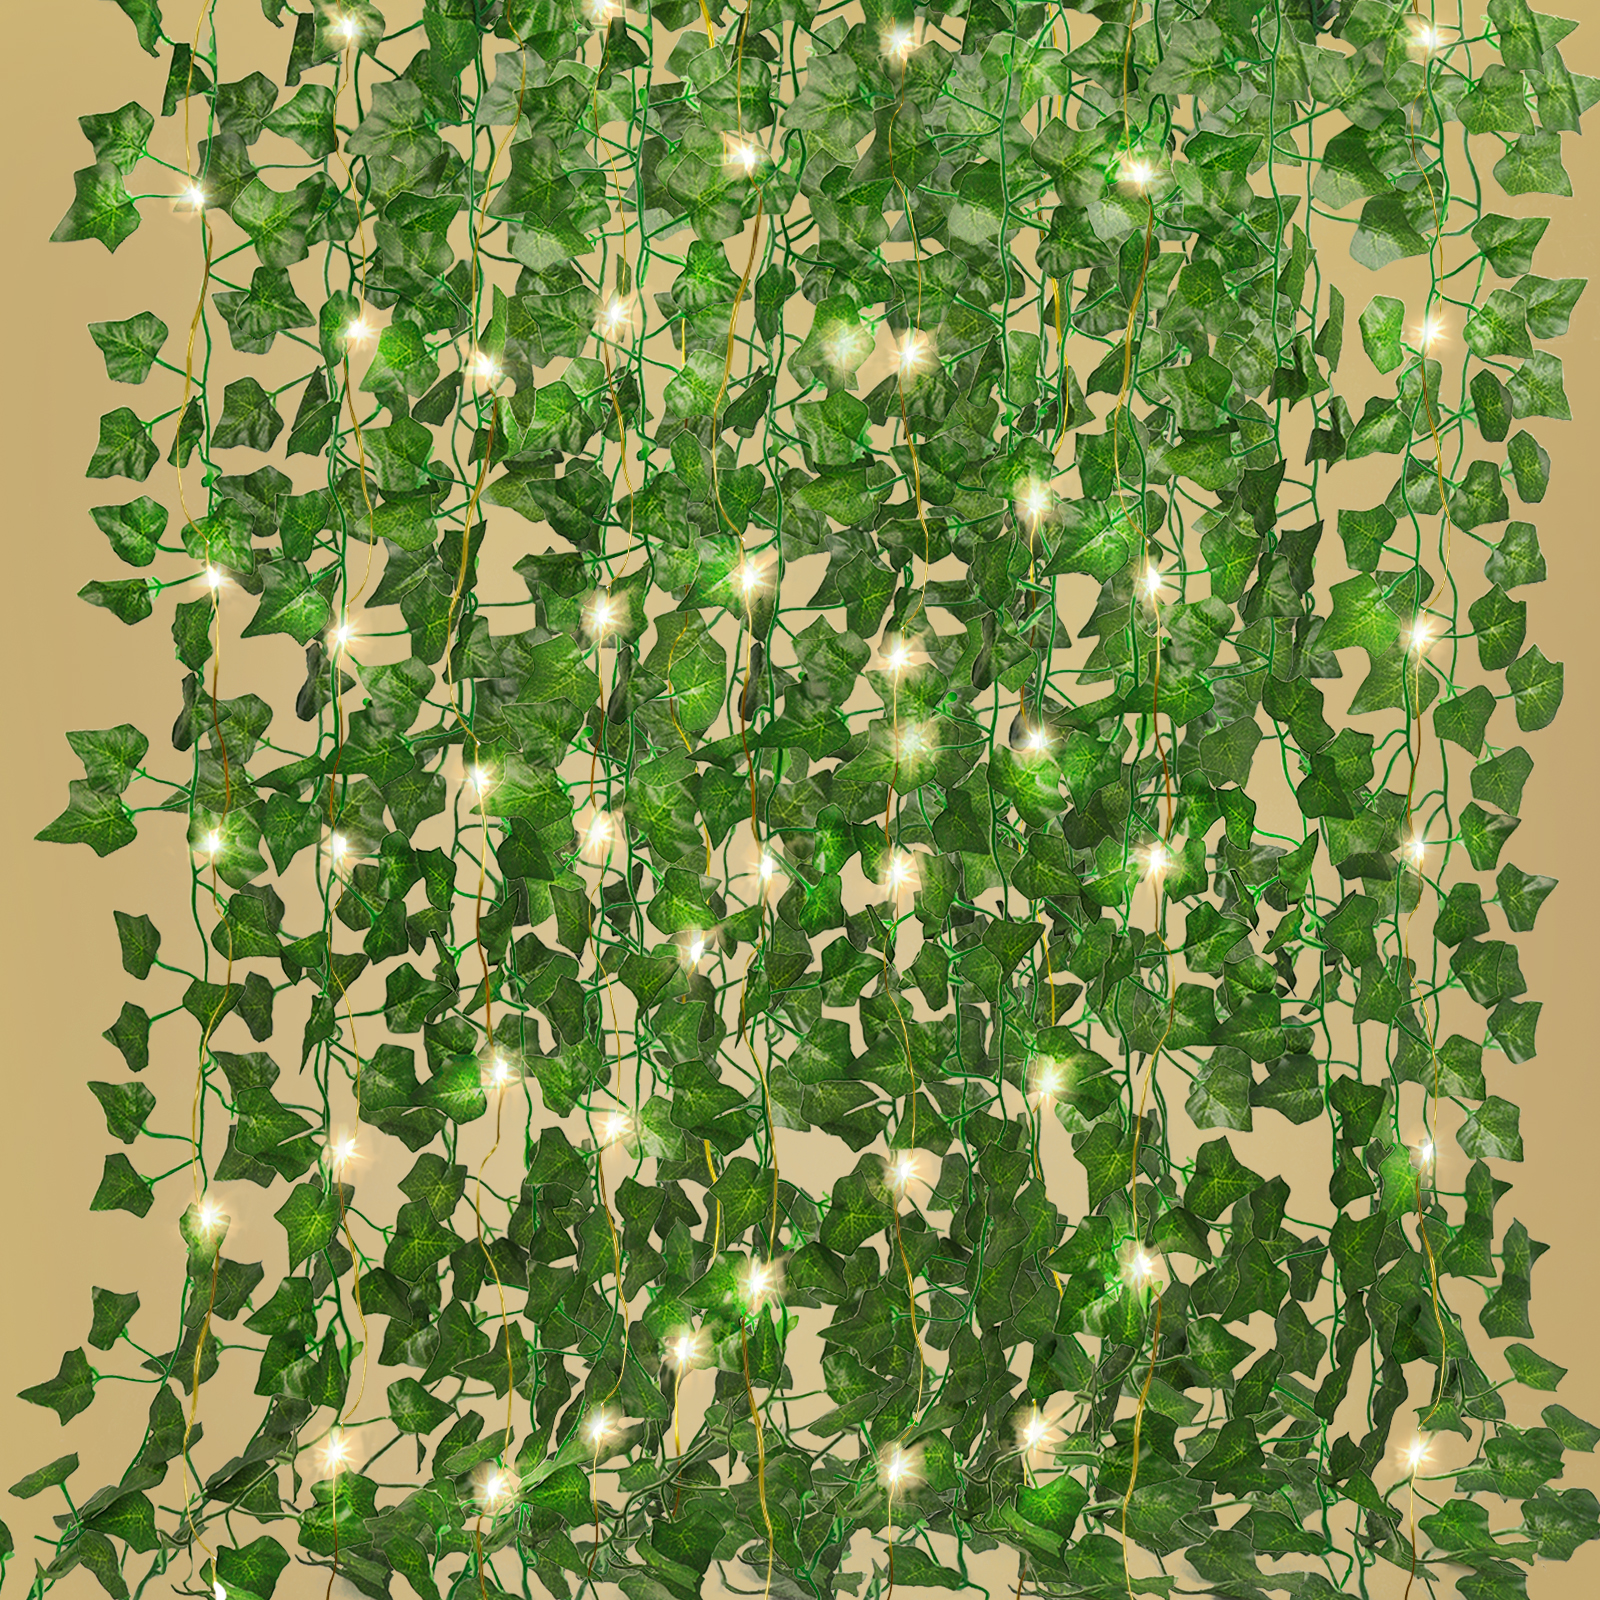 RECUTMS Ivy Fake Vines 24 Pack 173 ft Artificial Ivy with 200 LED String Light Leaves Wall Decor for Room Garden Office Wedding Wall Decor - image 1 of 7